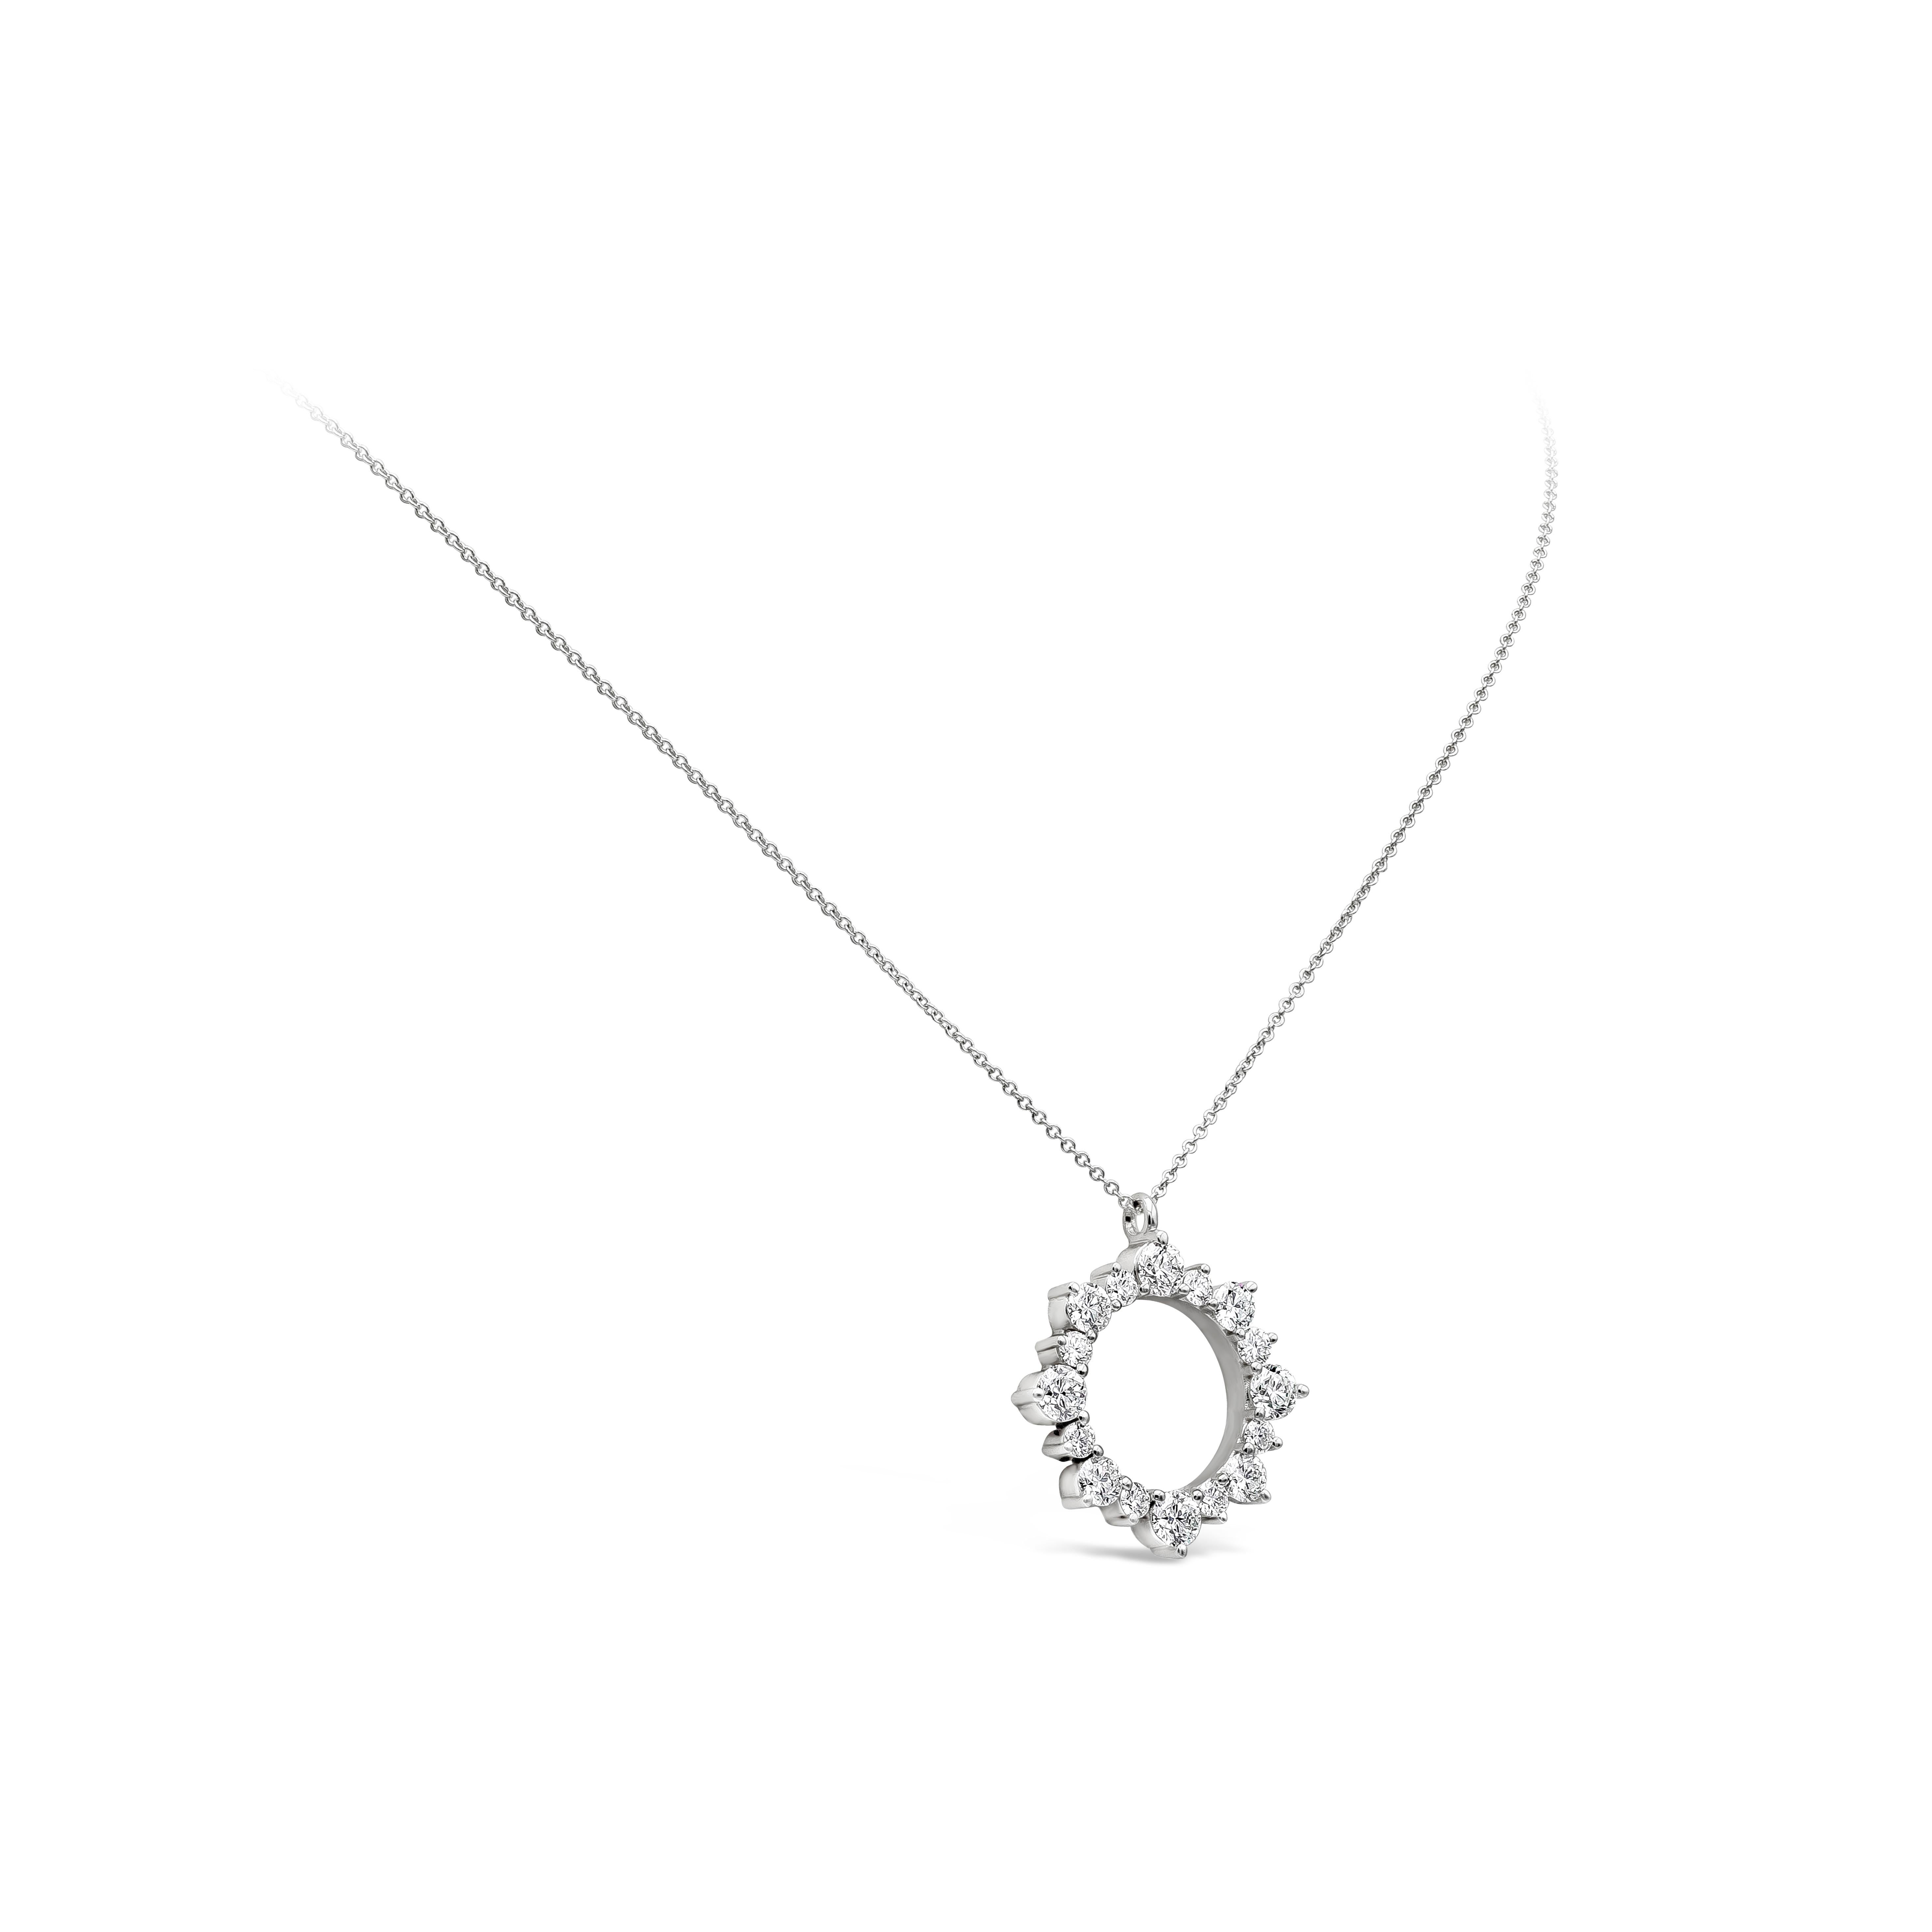 A stylish pendant necklace showcasing a row of 16 bright round diamonds,  set in an open-work, circular design. Diamonds weighs 4.10 carats total and are approximately G color, VS clarity. Made in 18 karats white gold.

Roman Malakov is a custom